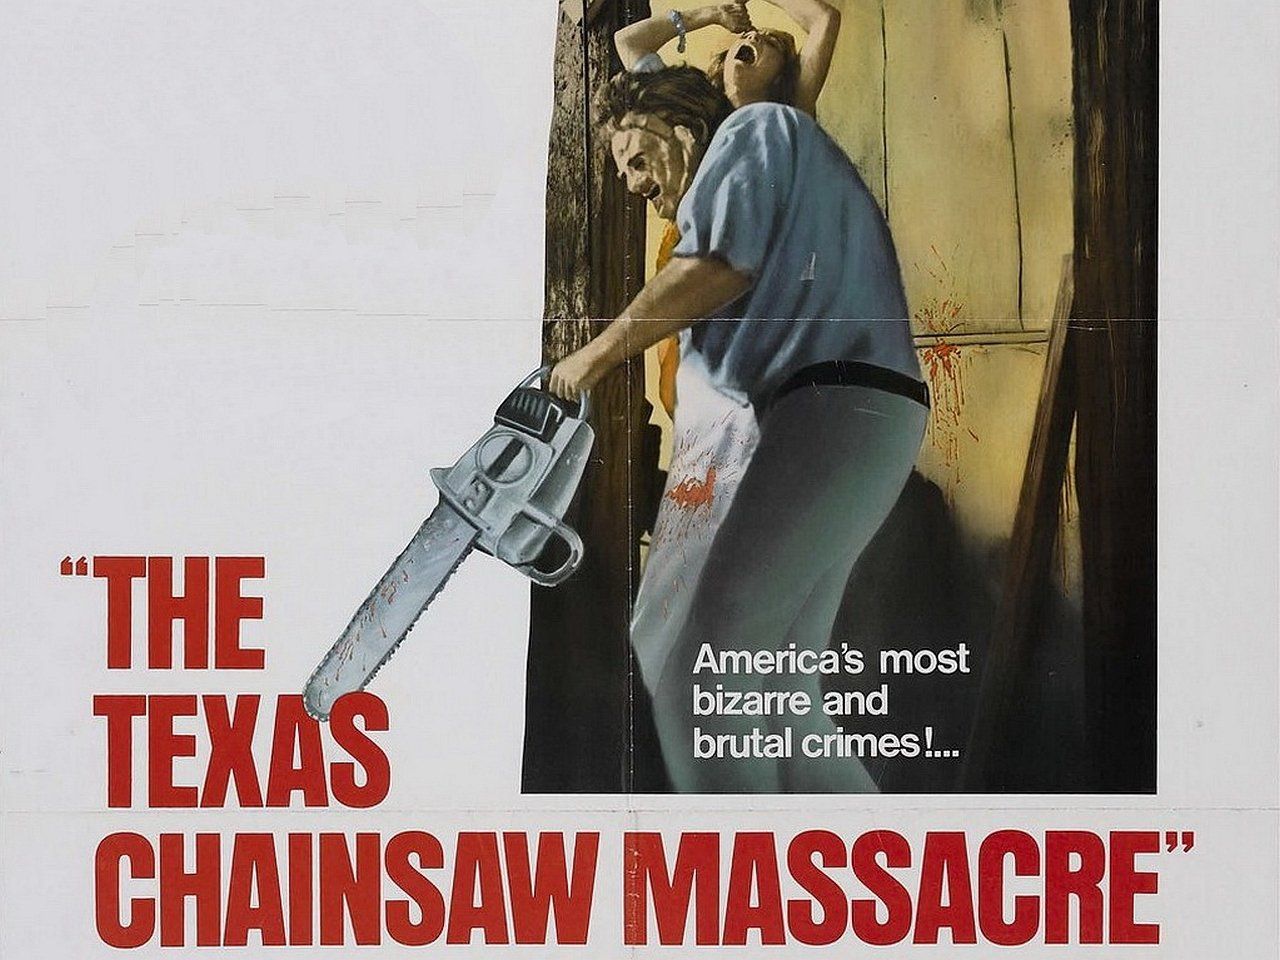 The Texas Chainsaw Massacre A Sub Gallery By: TorinoGT